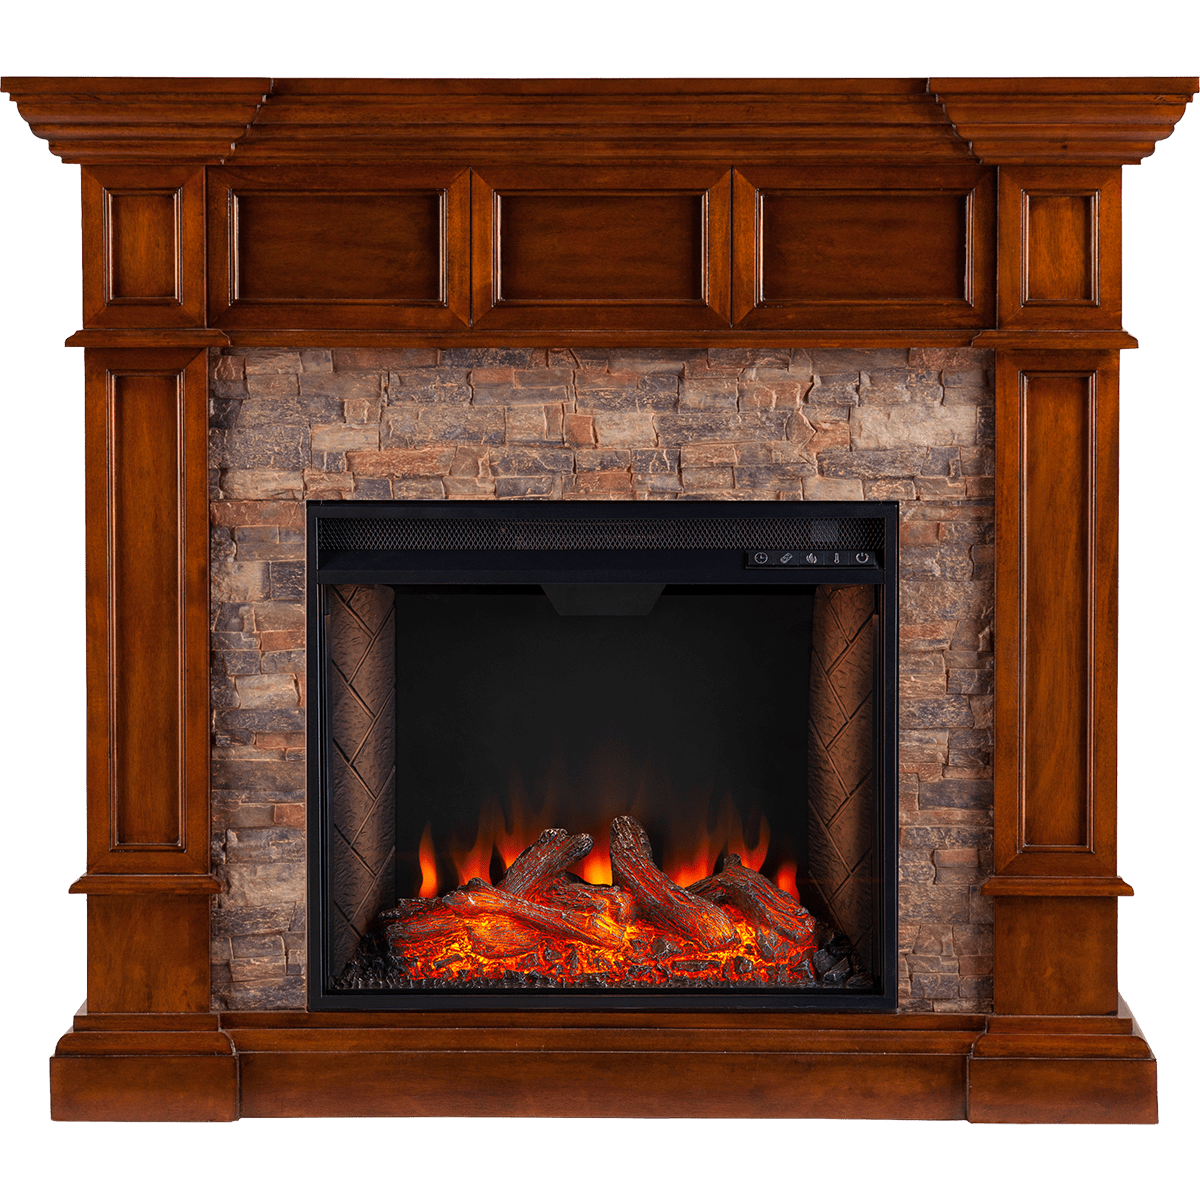 Space Heater that Looks Like Fireplace Lovely southern Enterprises Merrimack Simulated Stone Convertible Electric Fireplace